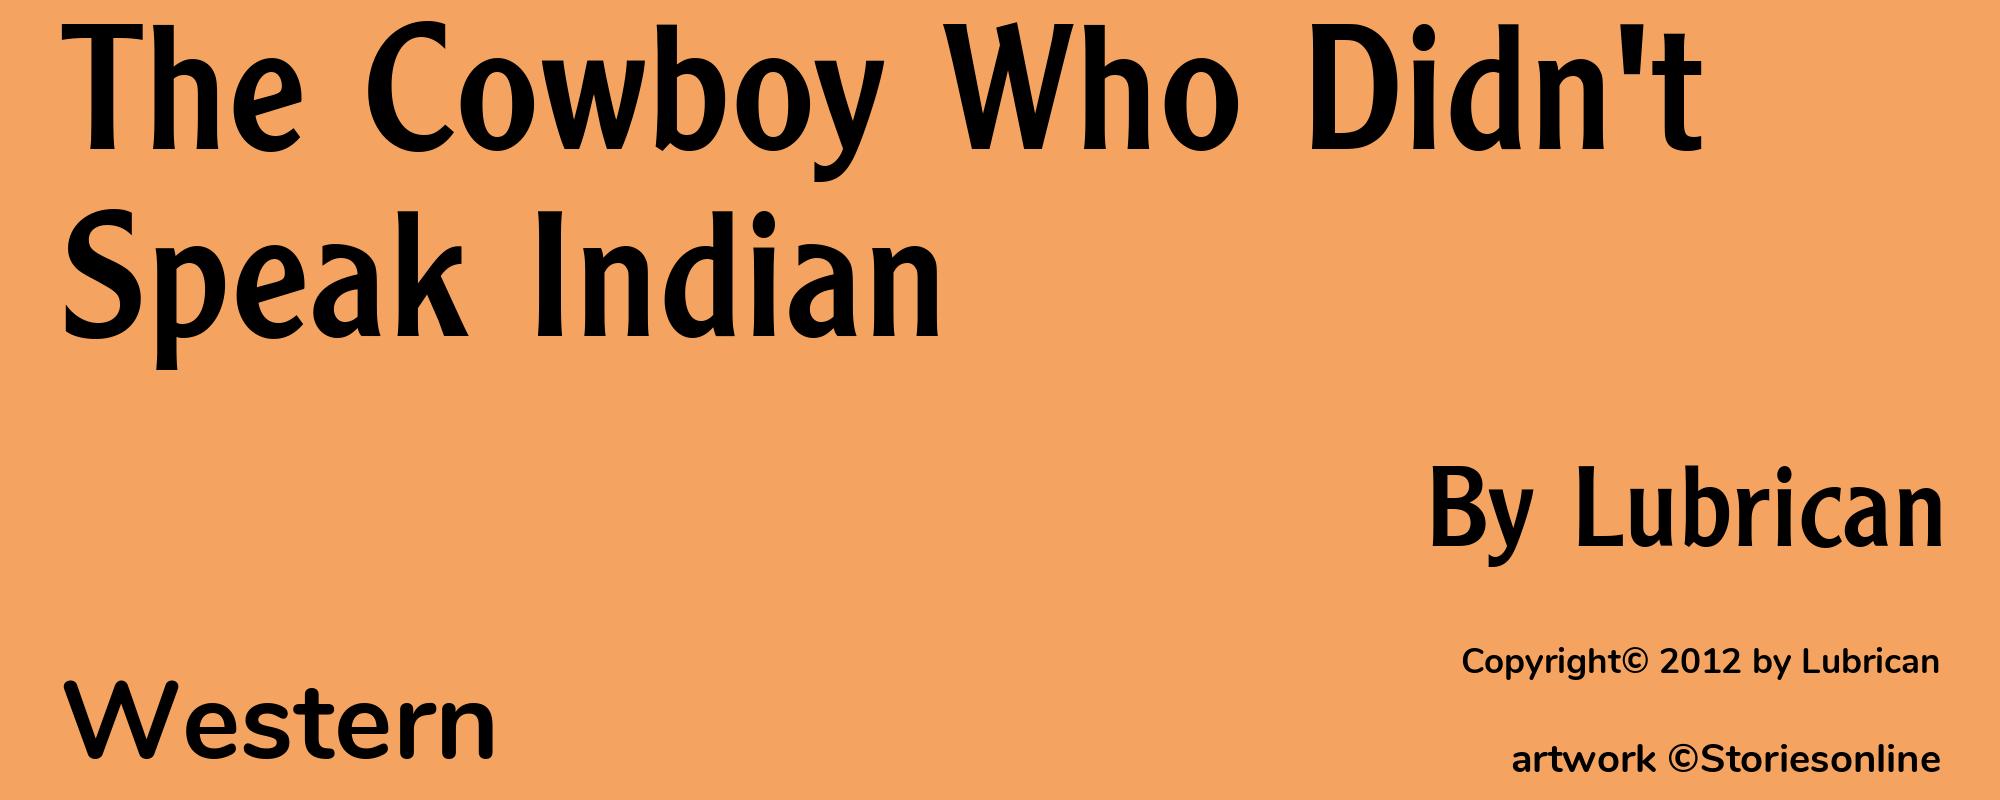 The Cowboy Who Didn't Speak Indian - Cover